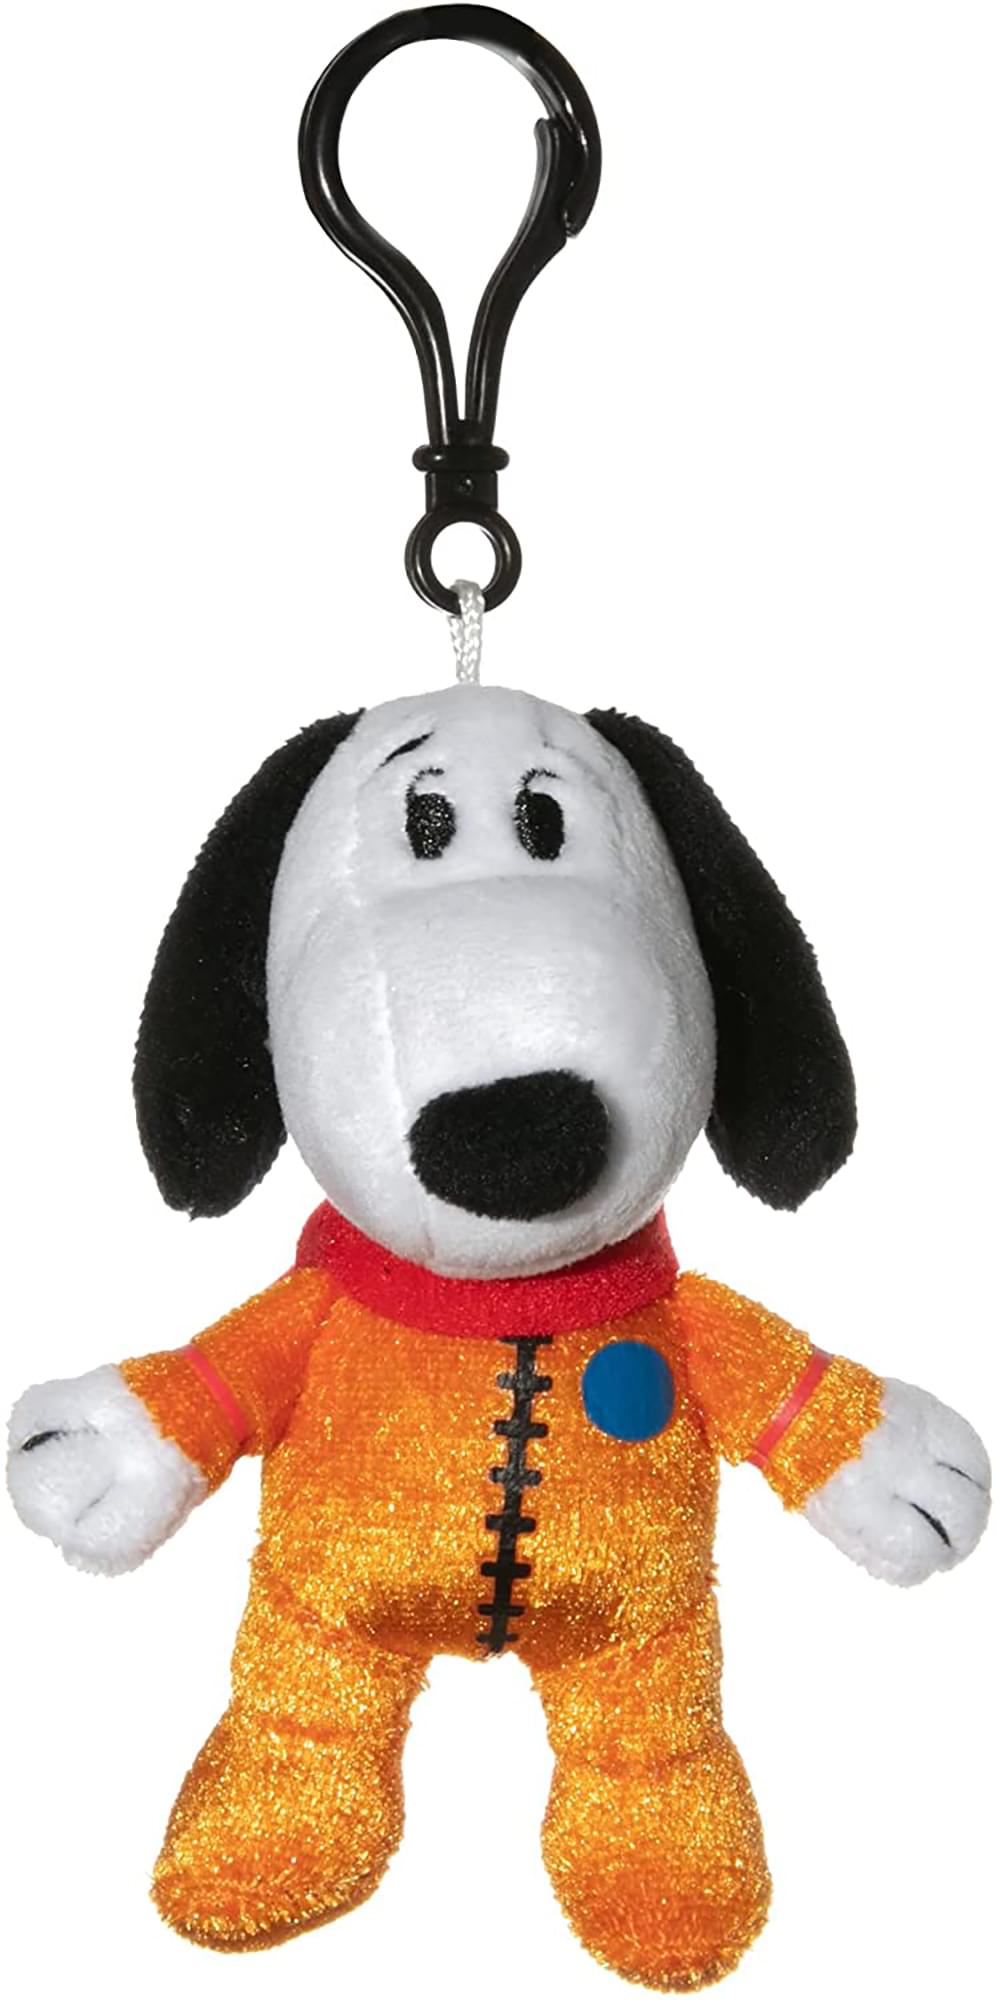 Snoopy in Space 4 Inch Plush Clip | Snoopy in Orange Astronaut Suit